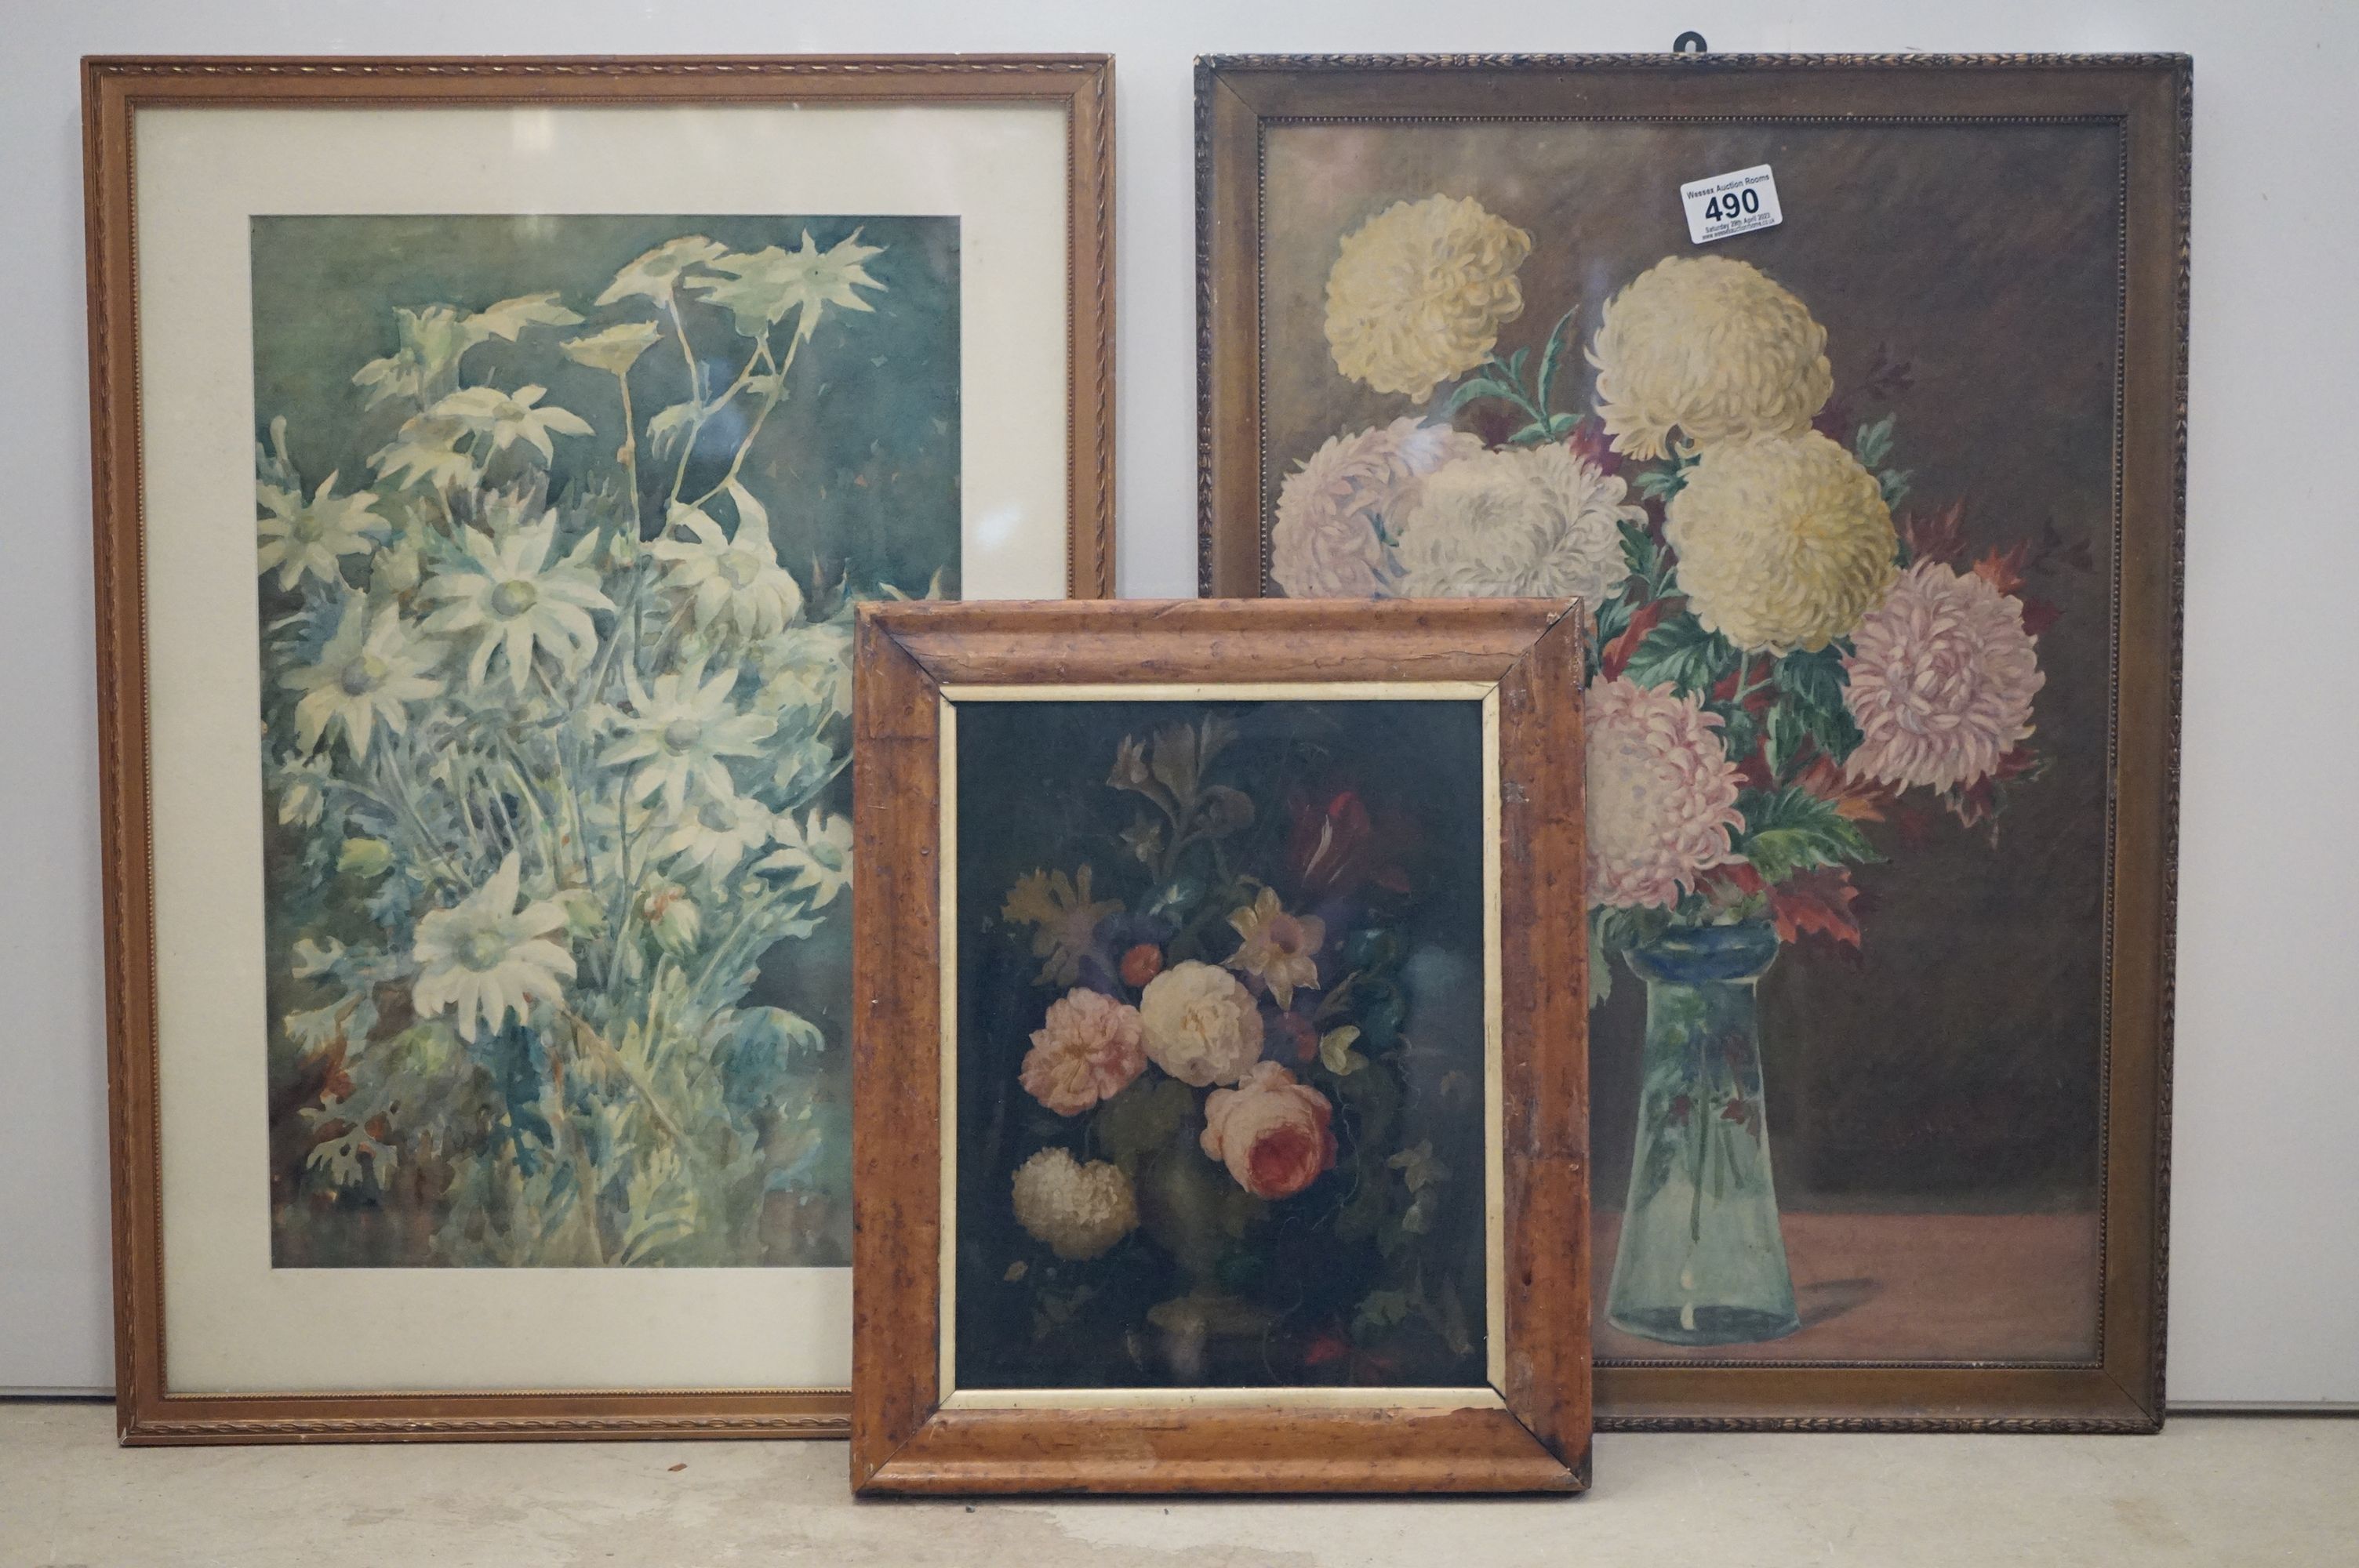 Oil on glass, a still life of flowers in an urn, together with two gilt framed watercolours of